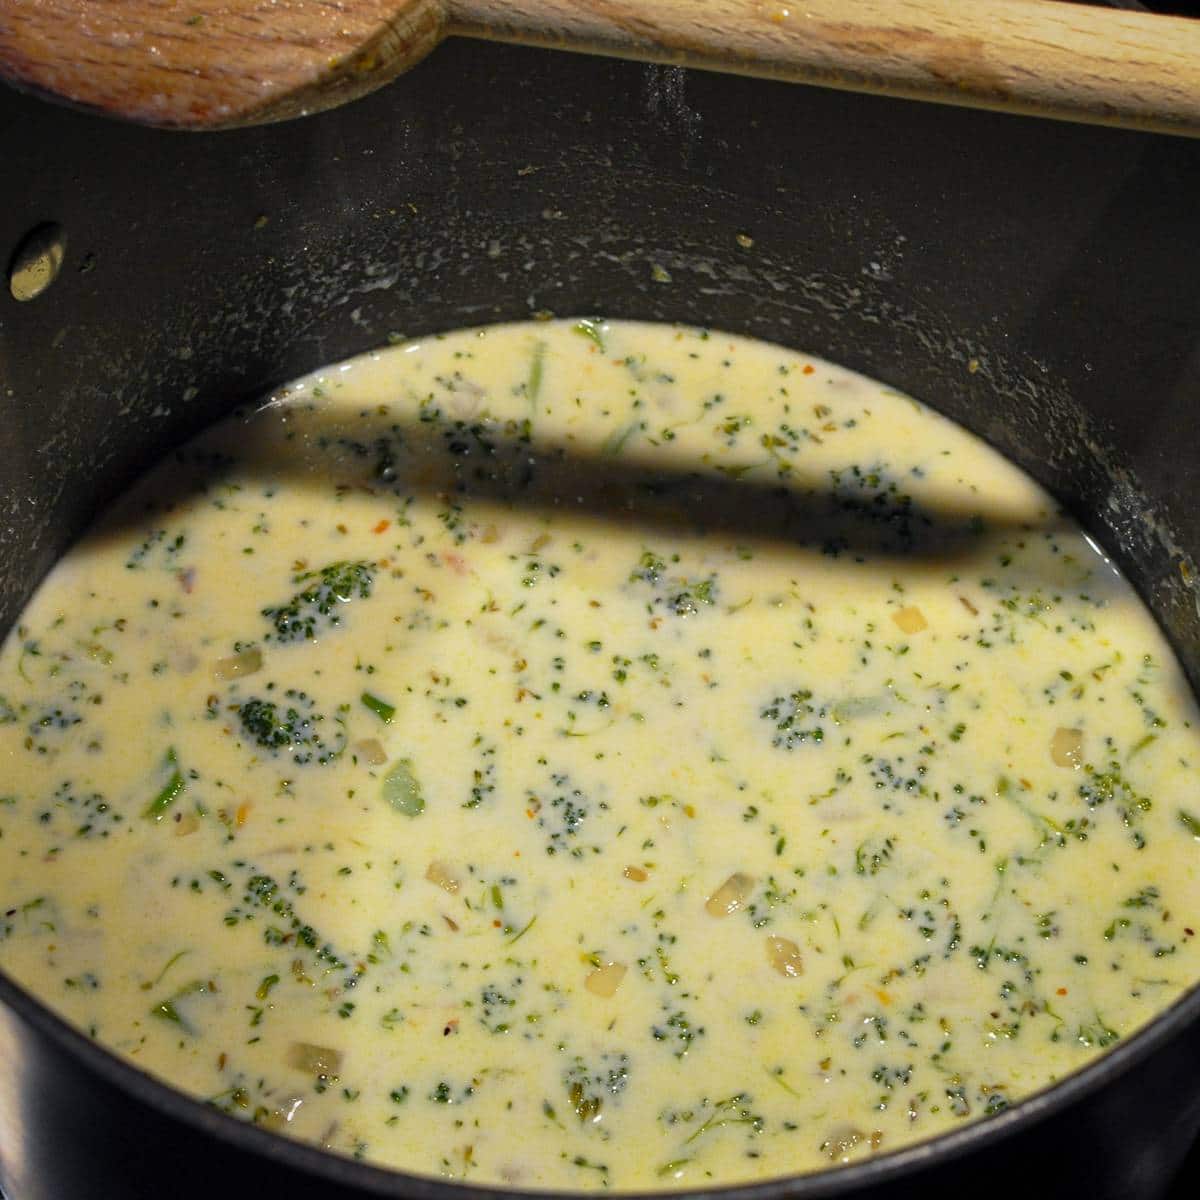 broccoli cheddar soup being cooked in a large pot